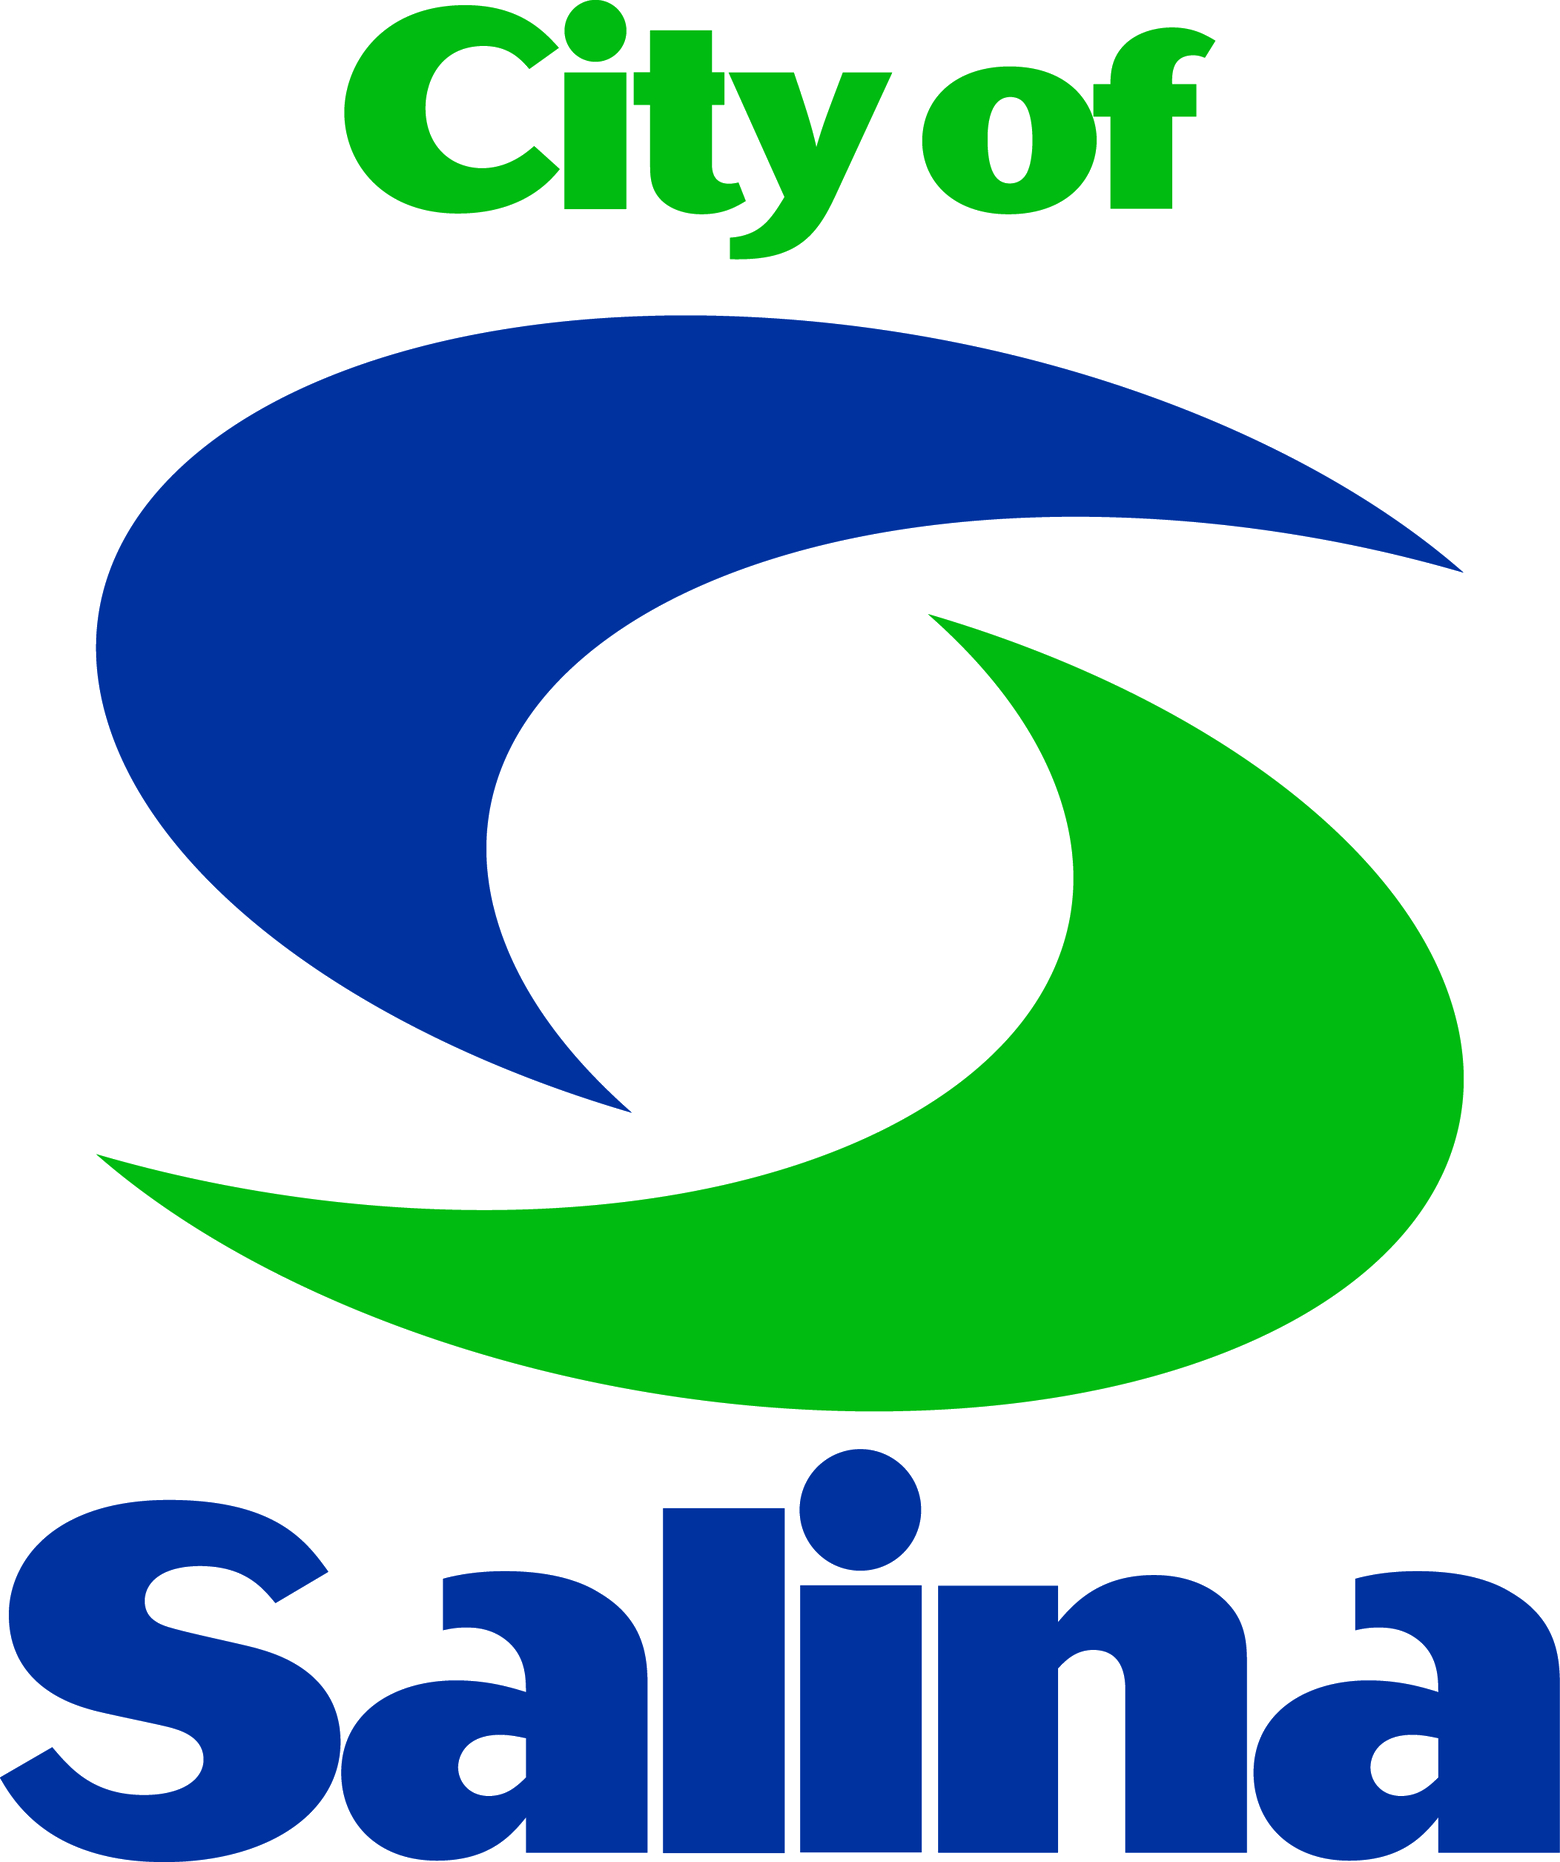 Additional Photos/City-blue-green-logo (2).png